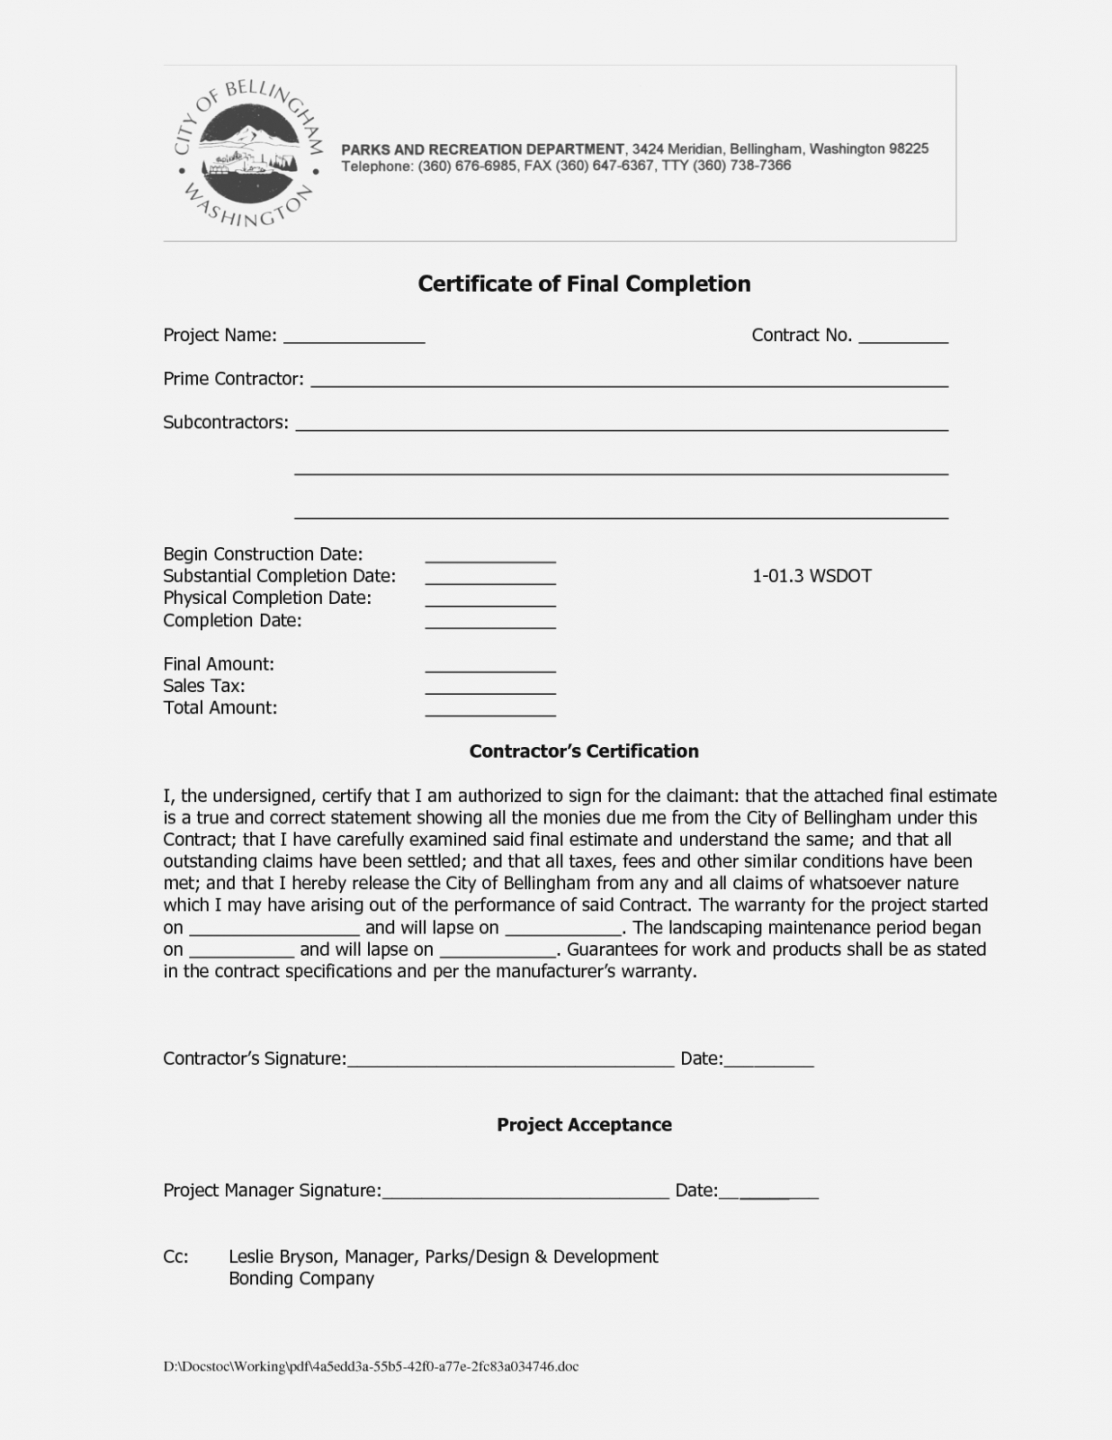 Roofing Certificate Of Completion Template – Zimer.bwong.co Regarding Certificate Of Completion Template Construction